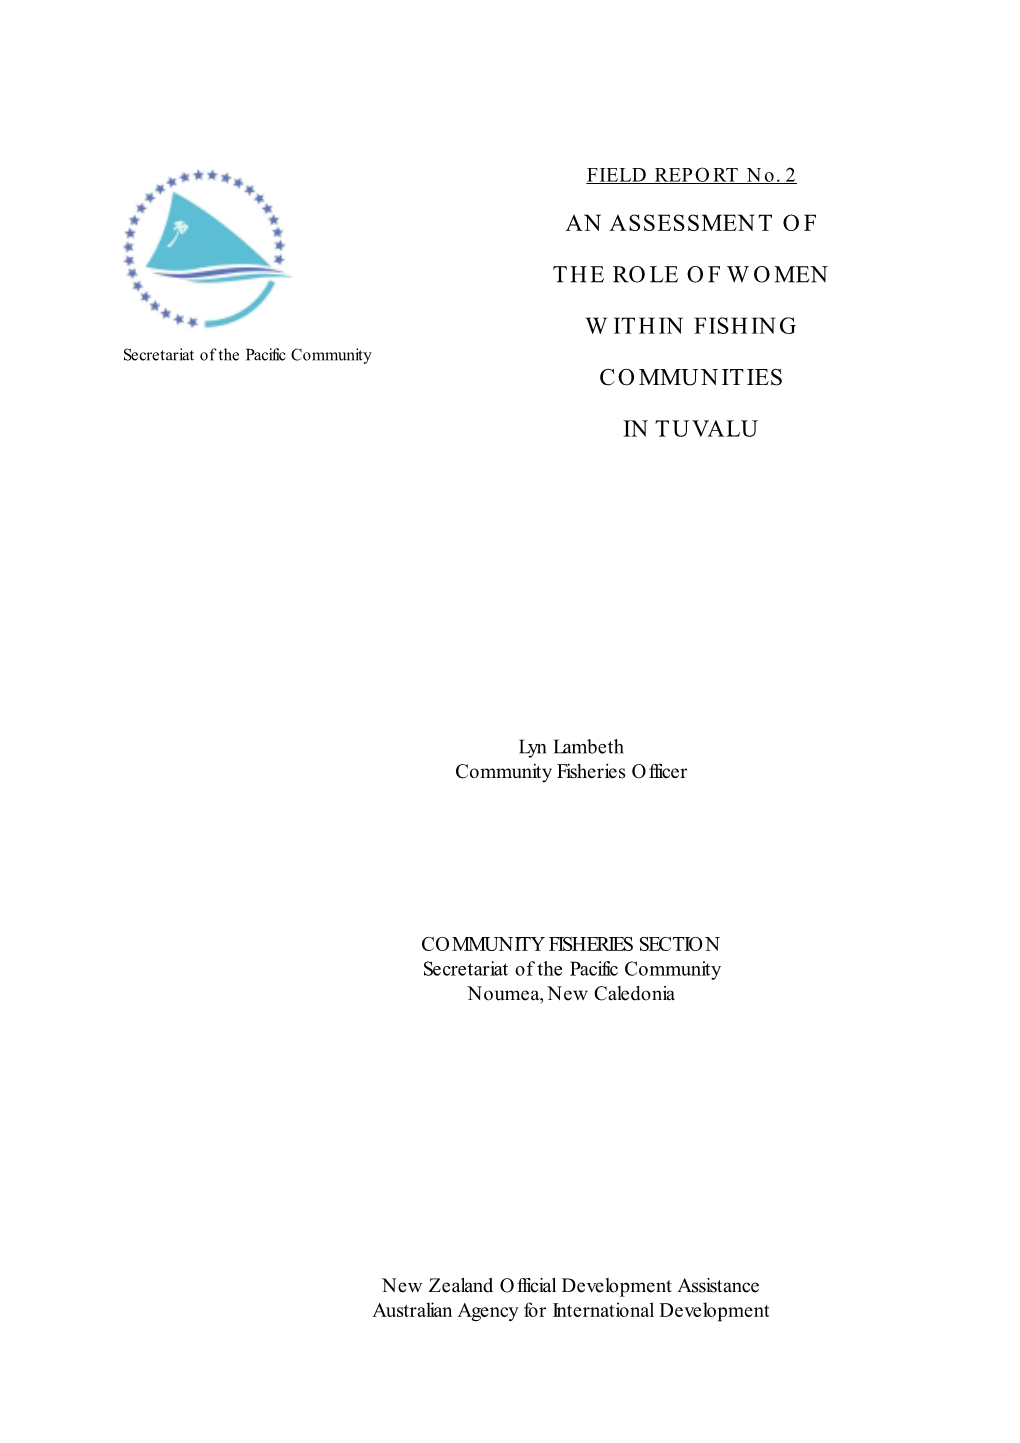 An Assessment of the Role of Women Within Fishing Communities in Tuvalu